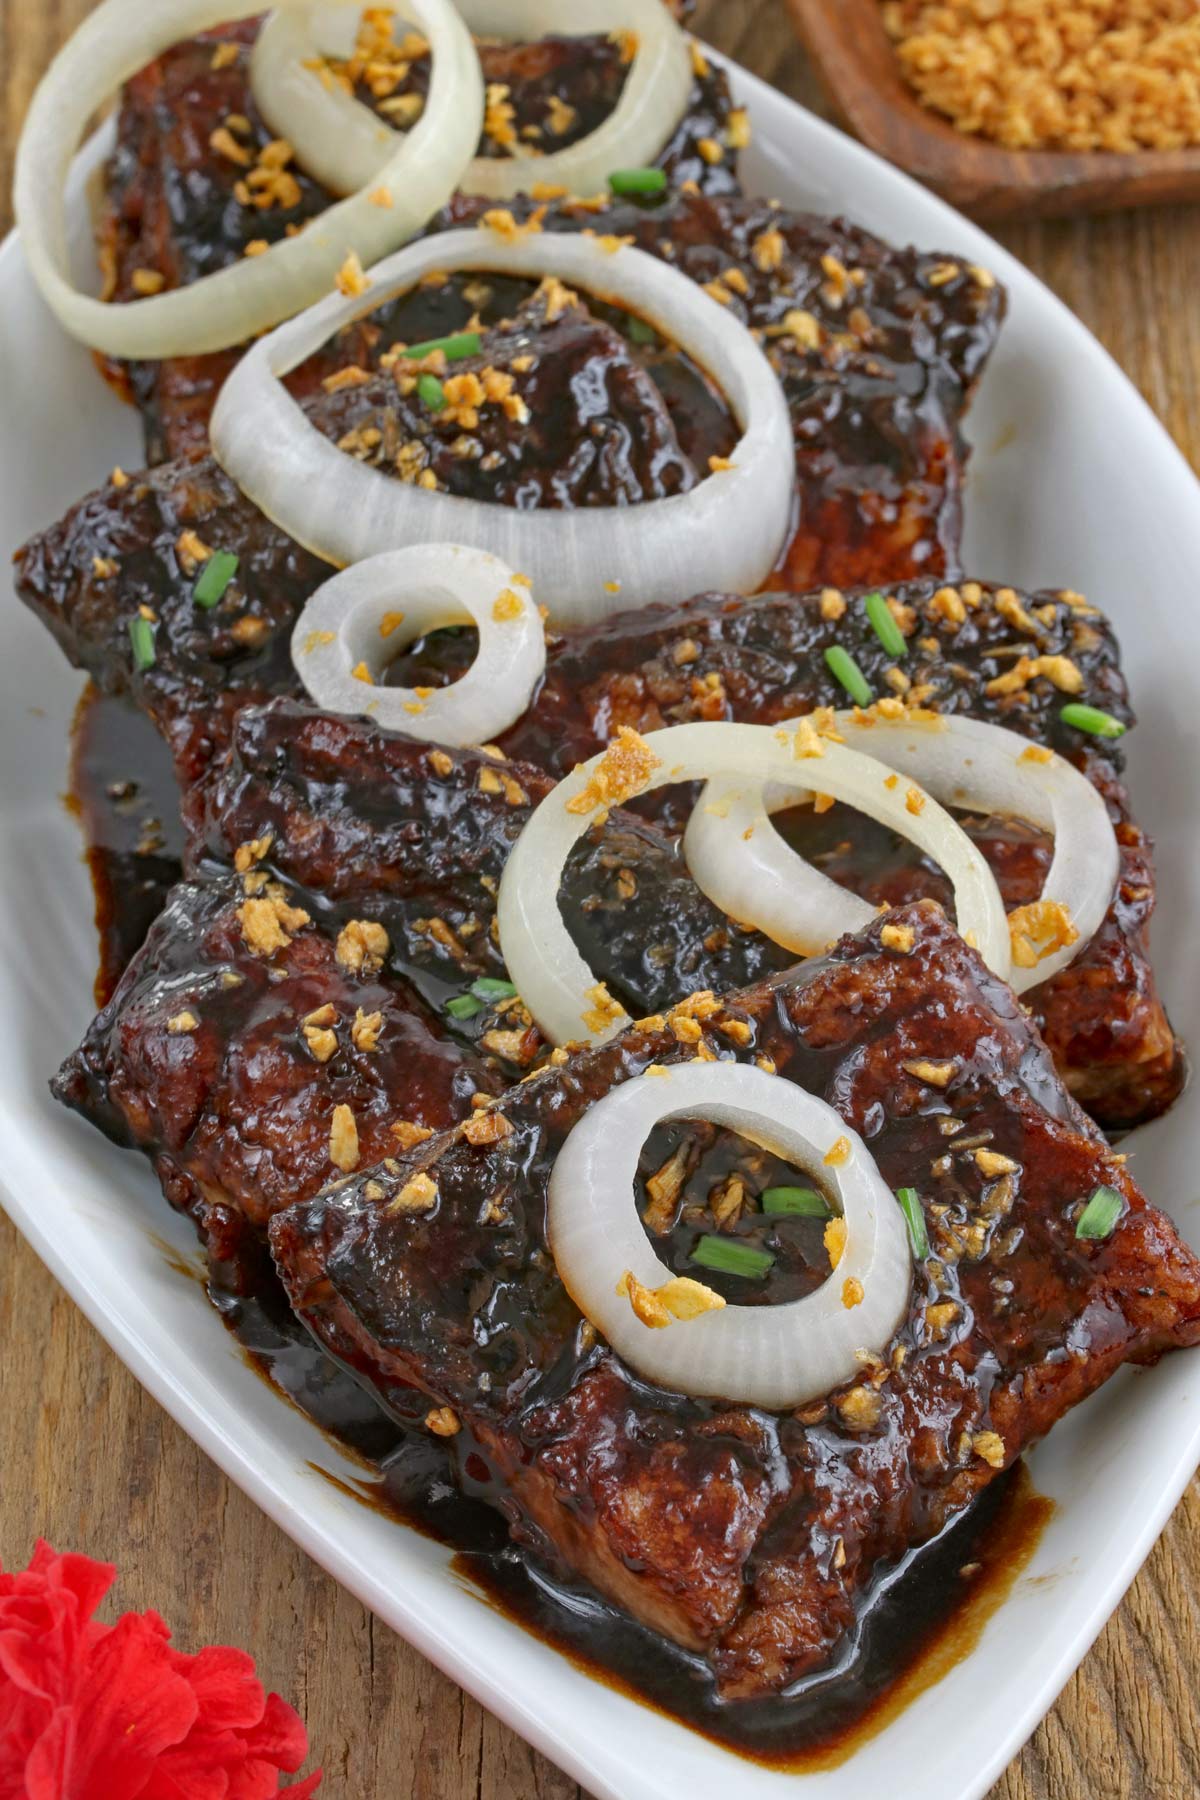 Fried boneless bangus/milkfish belly with tangy soy-sauce glaze sprinkled with toasted garlic. 